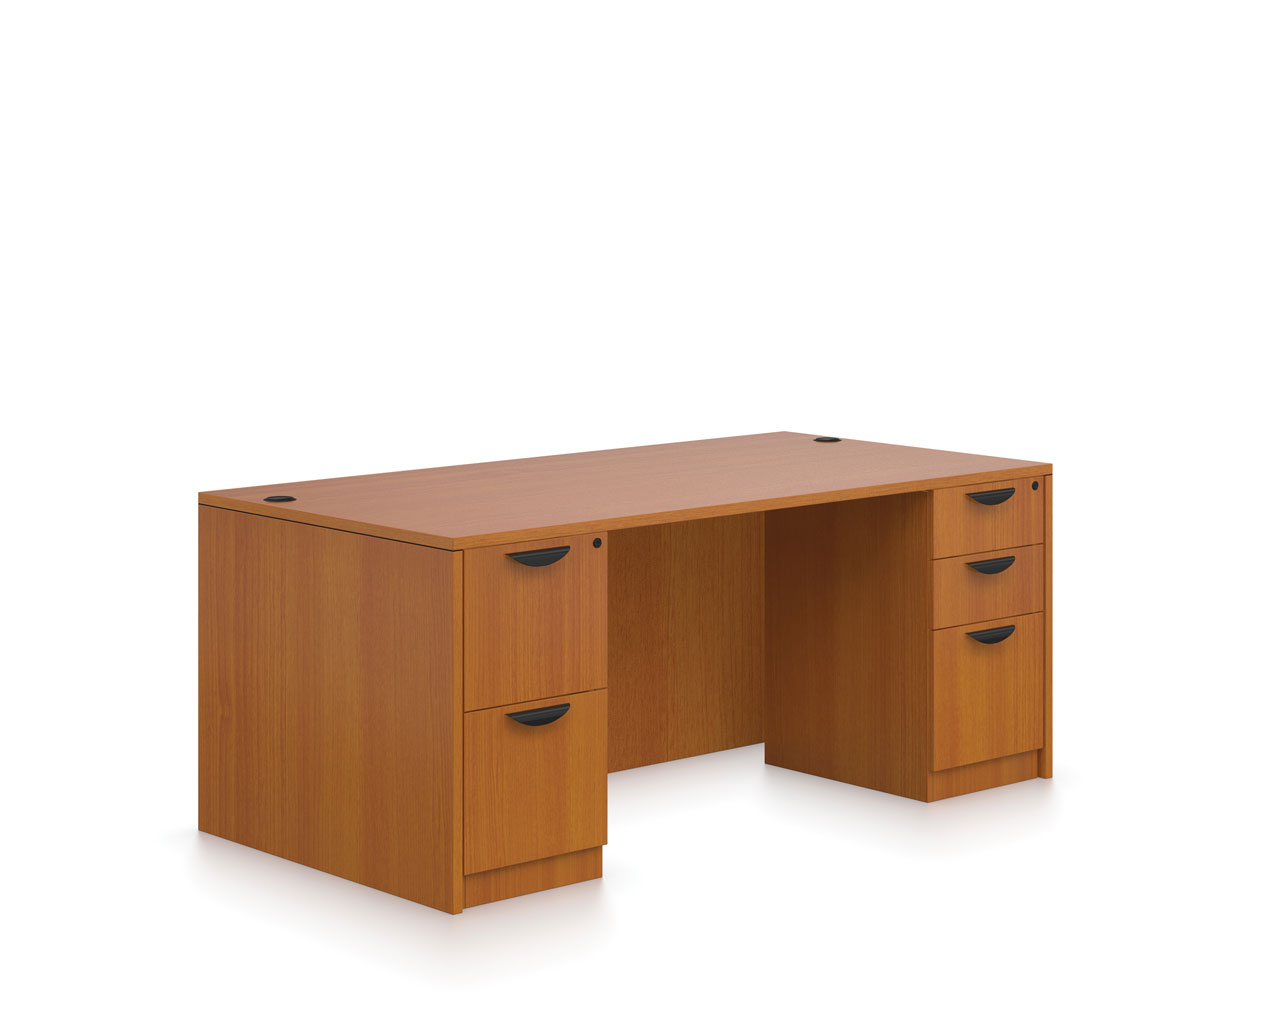 Affordable Office Furniture Desks from OTG - Shown in American Cherry woodgrain